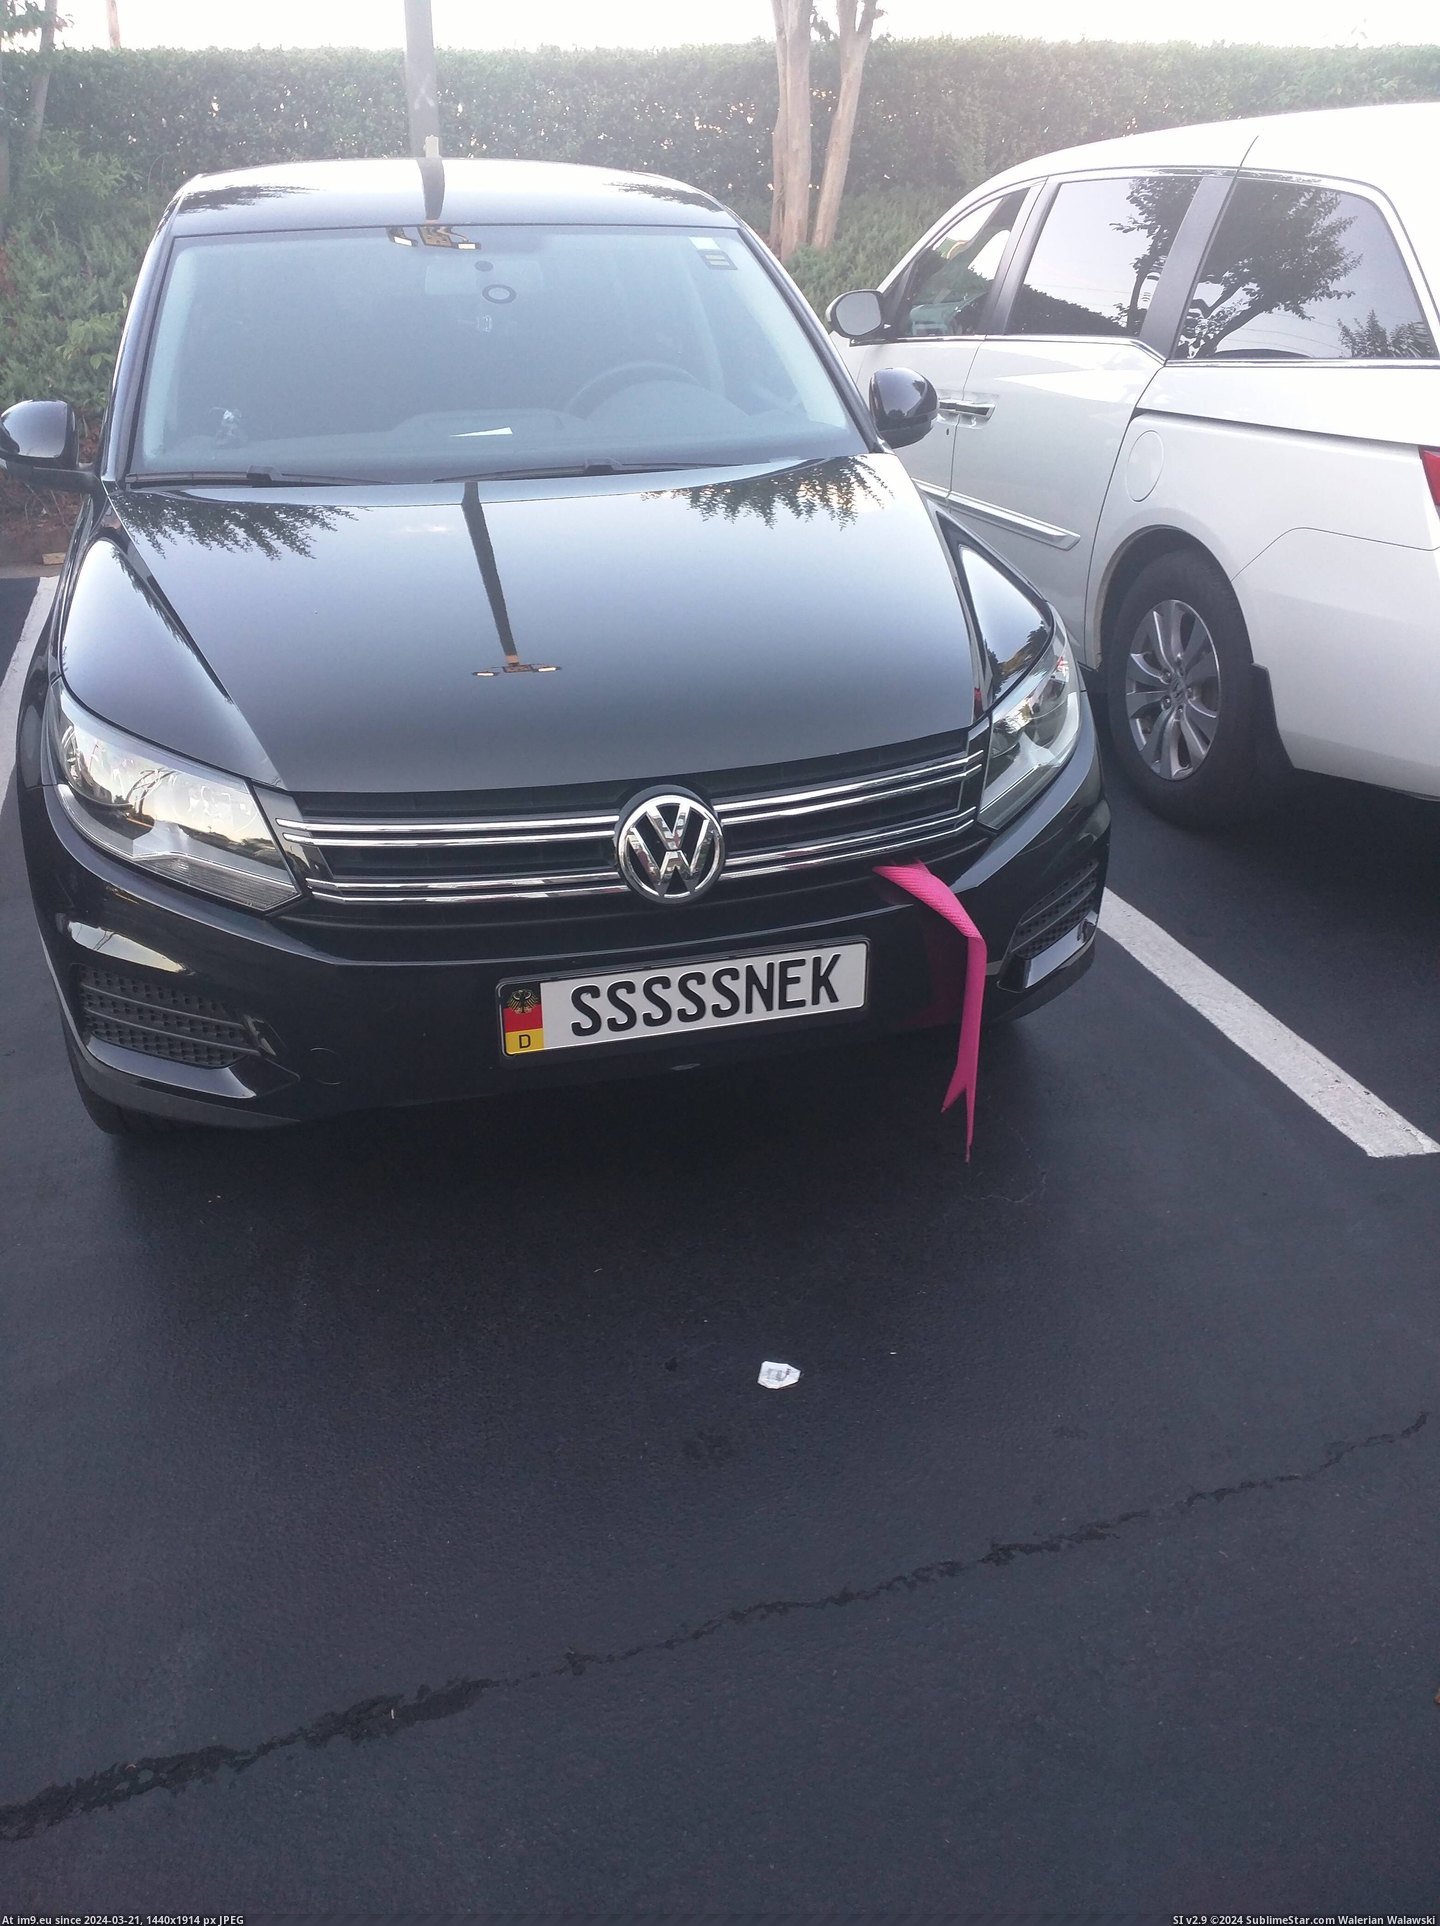 #Funny #Hotel #Car [Funny] This car outside my hotel Pic. (Image of album My r/FUNNY favs))